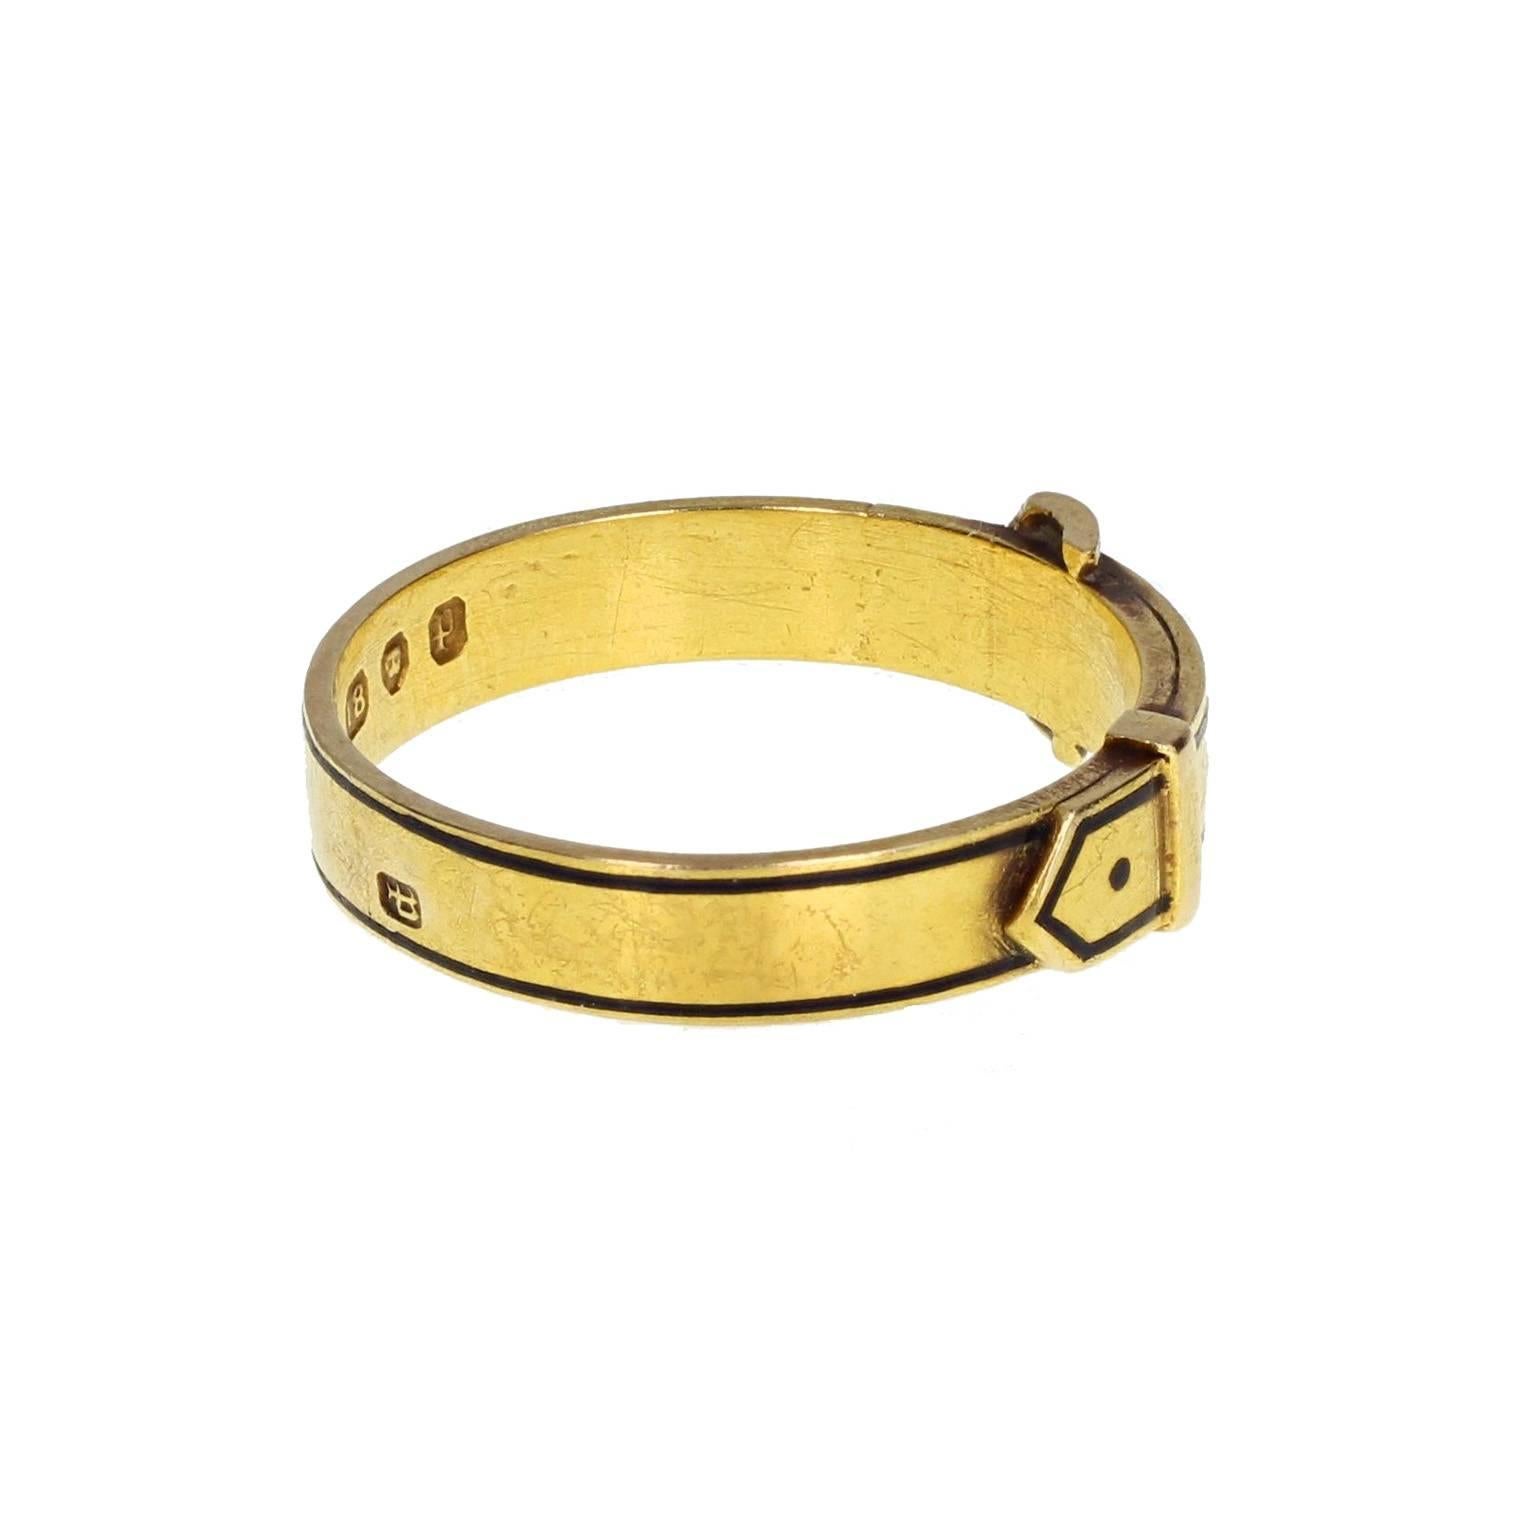 Dated 1870, this exquisite quality gold and black enamel buckle ring is from the height of the mourning jewellery trend. Following the death of Queen Victoria's beloved husband, Prince Albert in December 1861, mourning jewellery became highly